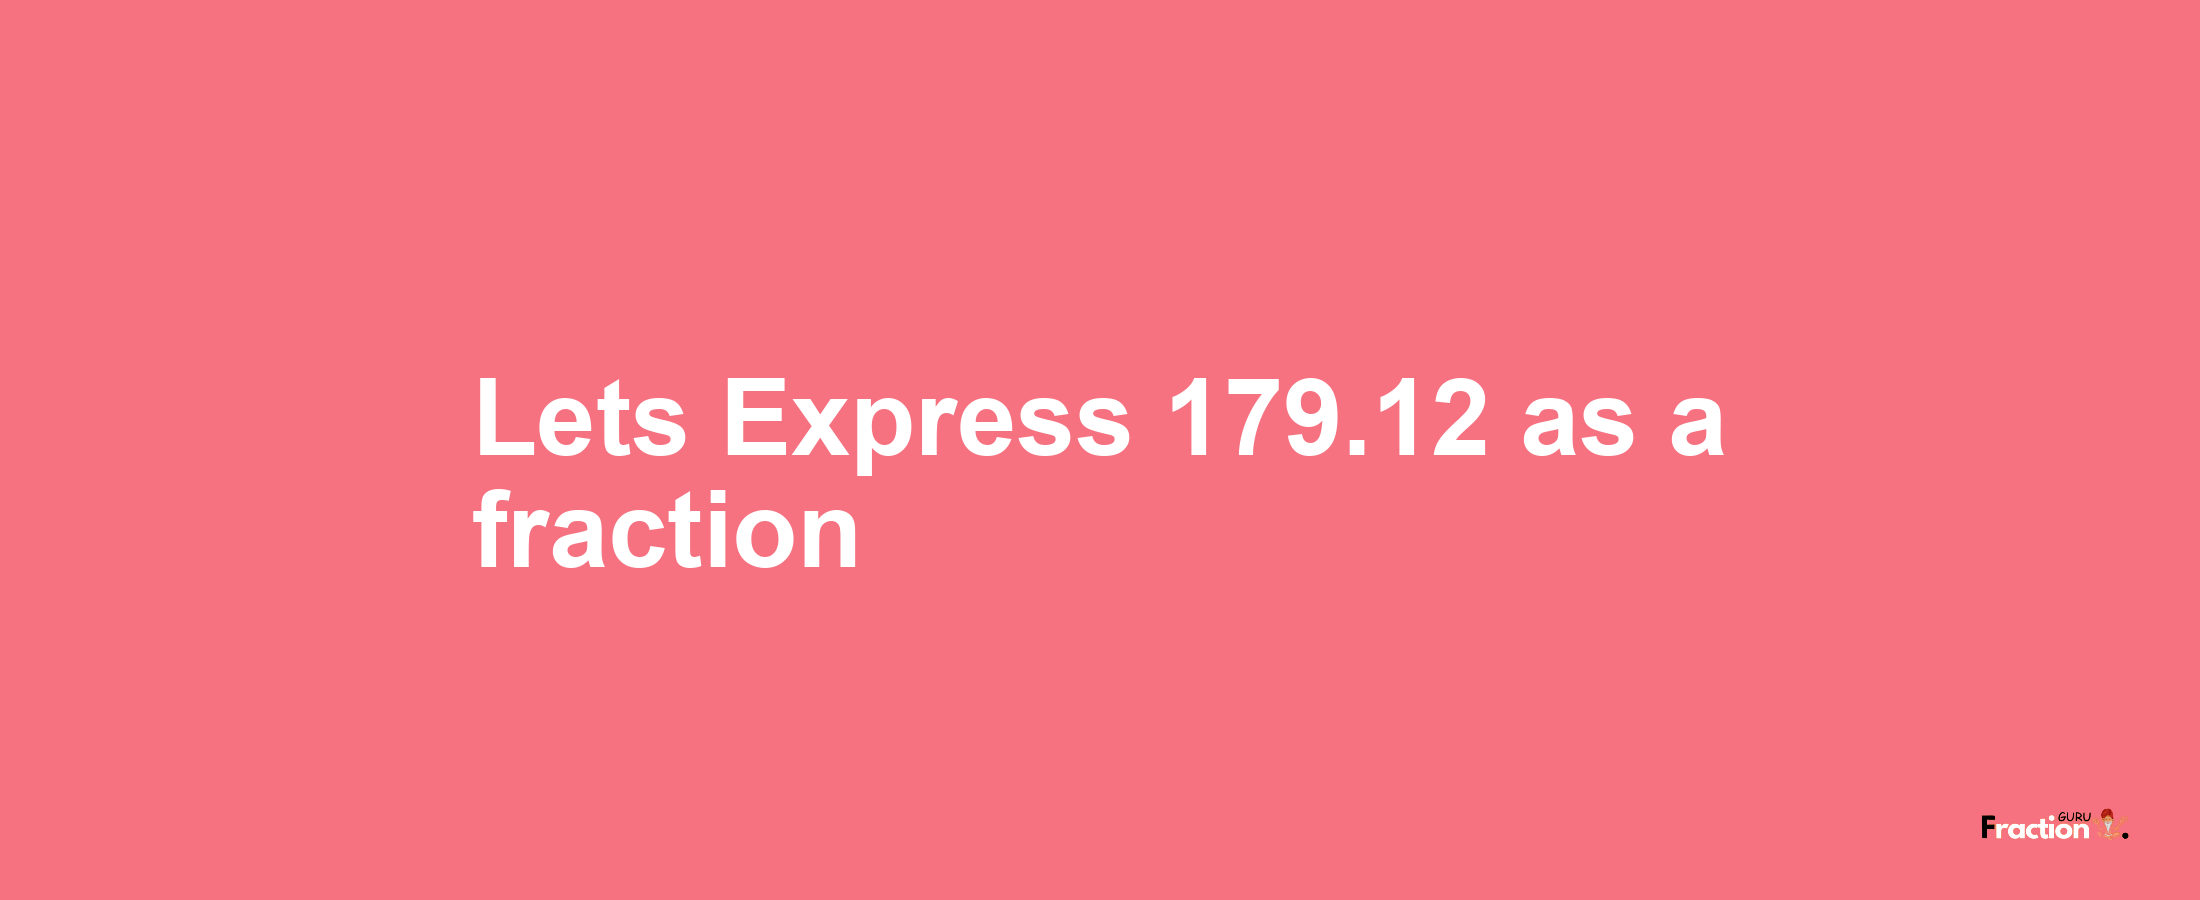 Lets Express 179.12 as afraction